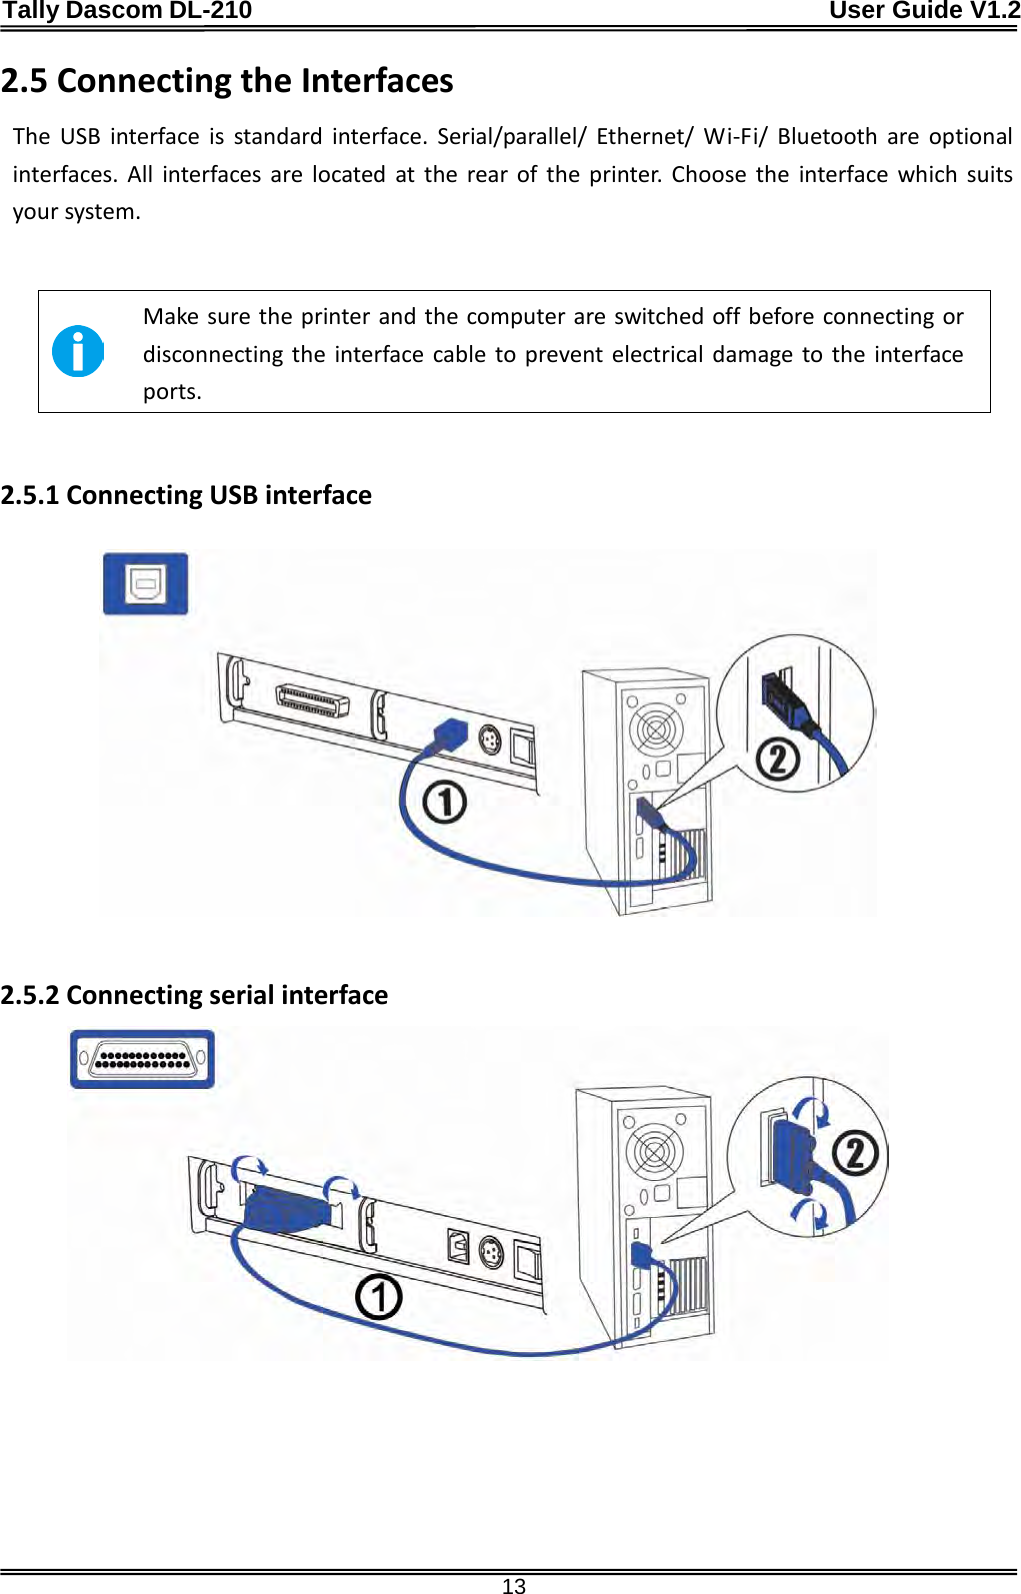 Tally Dascom DL-210                                              User Guide V1.2  13 2.5 Connecting the Interfaces The USB interface  is standard interface. Serial/parallel/ Ethernet/ Wi-Fi/ Bluetooth are optional interfaces. All interfaces are located at the rear of the printer. Choose the interface which suits your system.     Make sure the printer and the computer are switched off before connecting or disconnecting the interface cable to prevent electrical damage to the interface ports.  2.5.1 Connecting USB interface          2.5.2 Connecting serial interface          